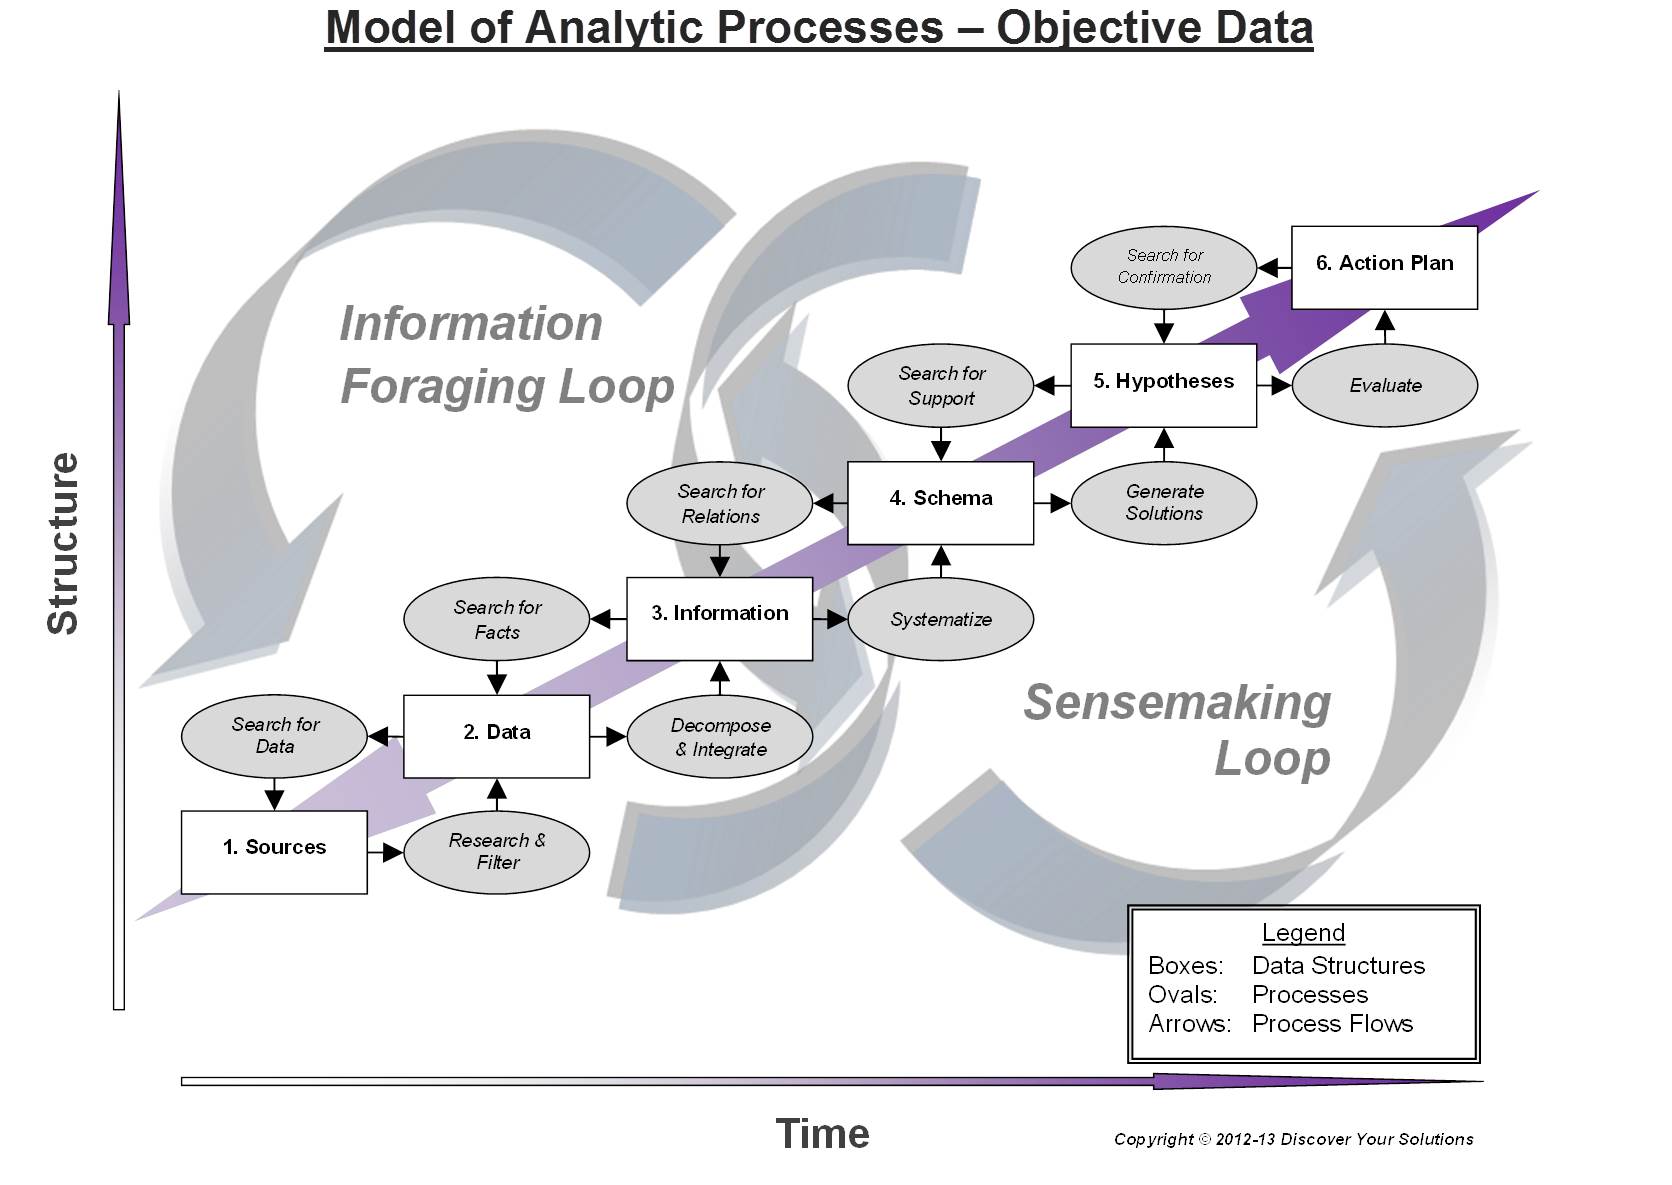 Model of Analytic Processes - Objective Data